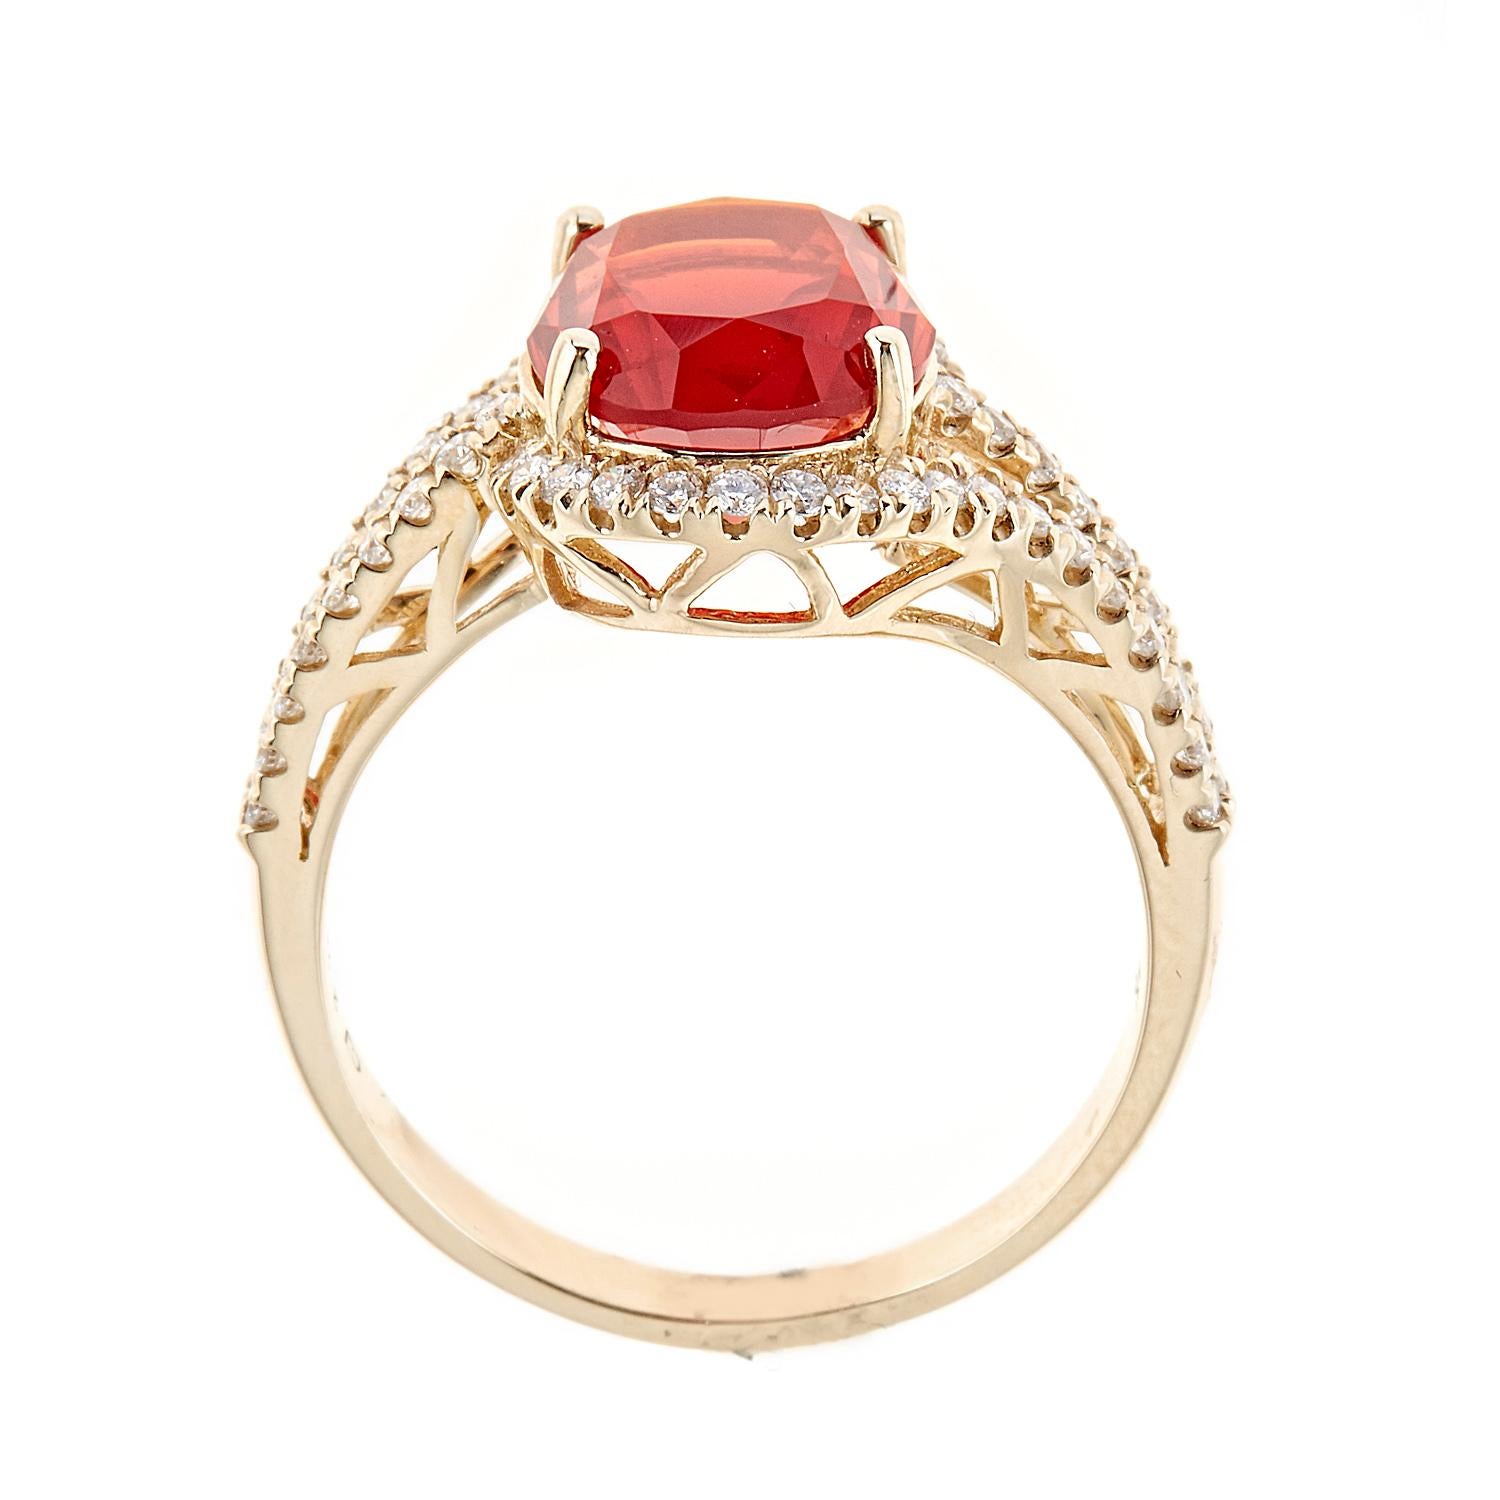 Stunning, timeless and classy eternity Unique Ring. Decorate yourself in luxury with this Gin & Grace Ring. The 14K Yellow Gold jewelry boasts with Oval-cut Fire Opal 1 pcs 2.17 carat, Natural Round-cut white Diamond (54 Pcs) 0.41 Carat accent